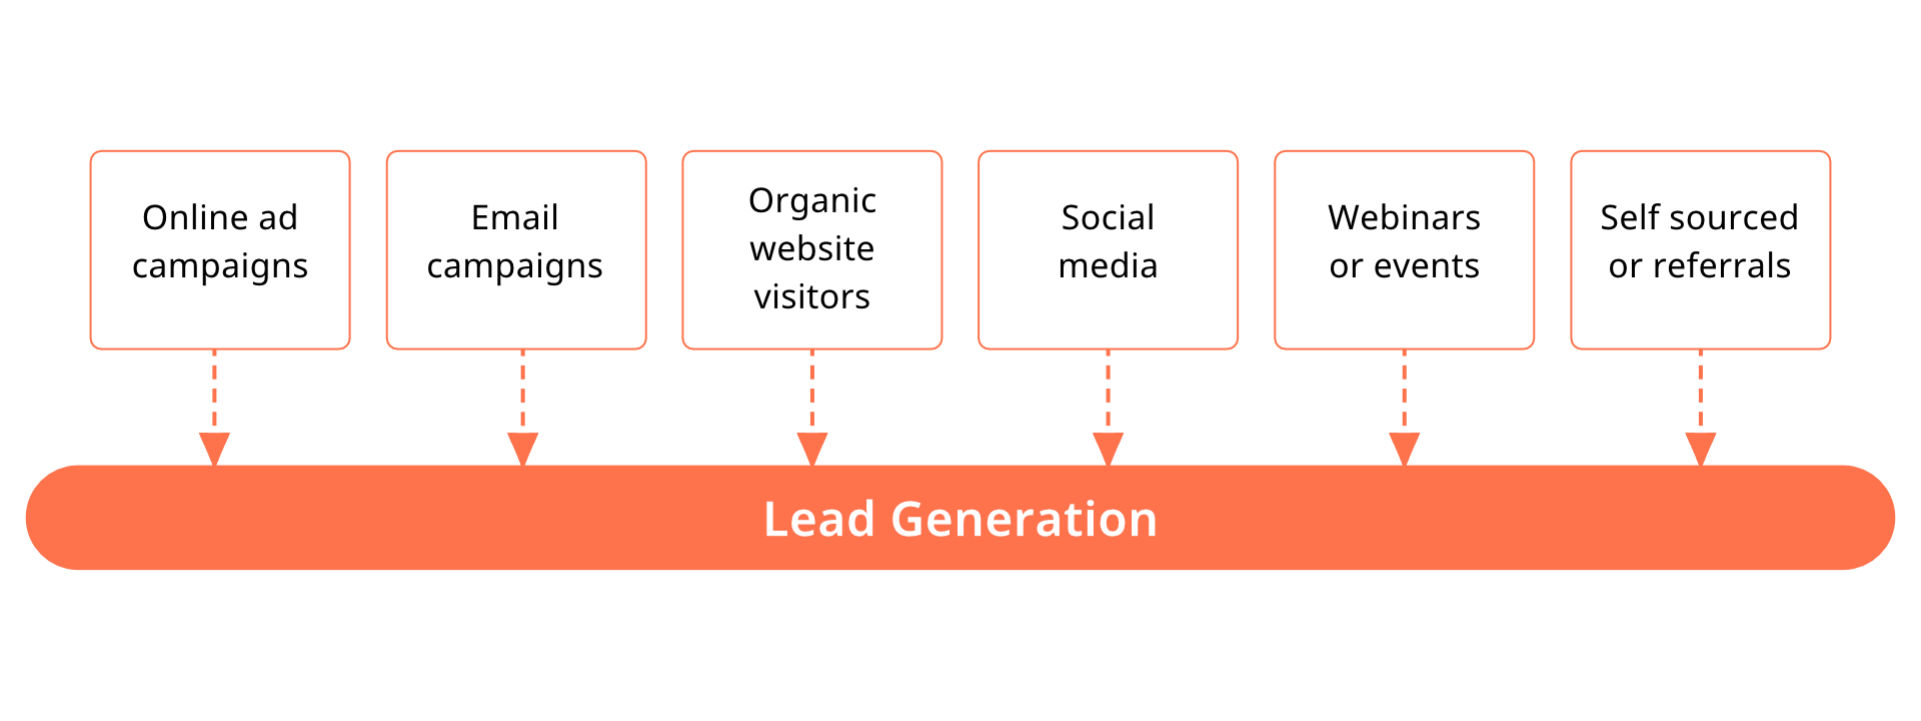 Lead Management Process Flow From Lead Generation to the Lead Assignment Stage